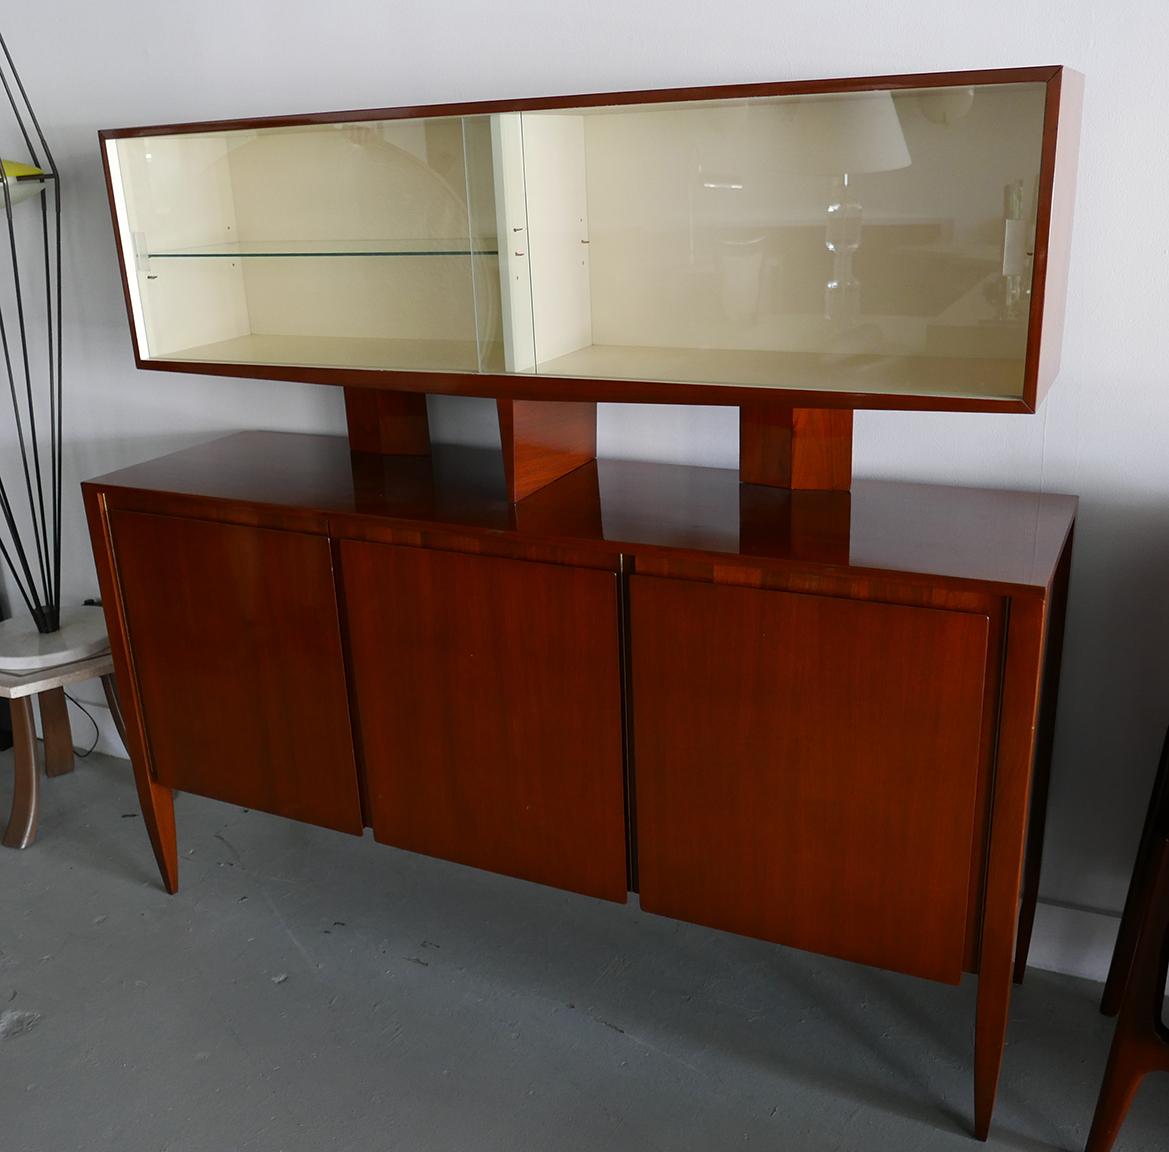 Italian Modern Walnut Cabinet by Gio Ponti for M. Singer & Sons In Excellent Condition For Sale In Hollywood, FL